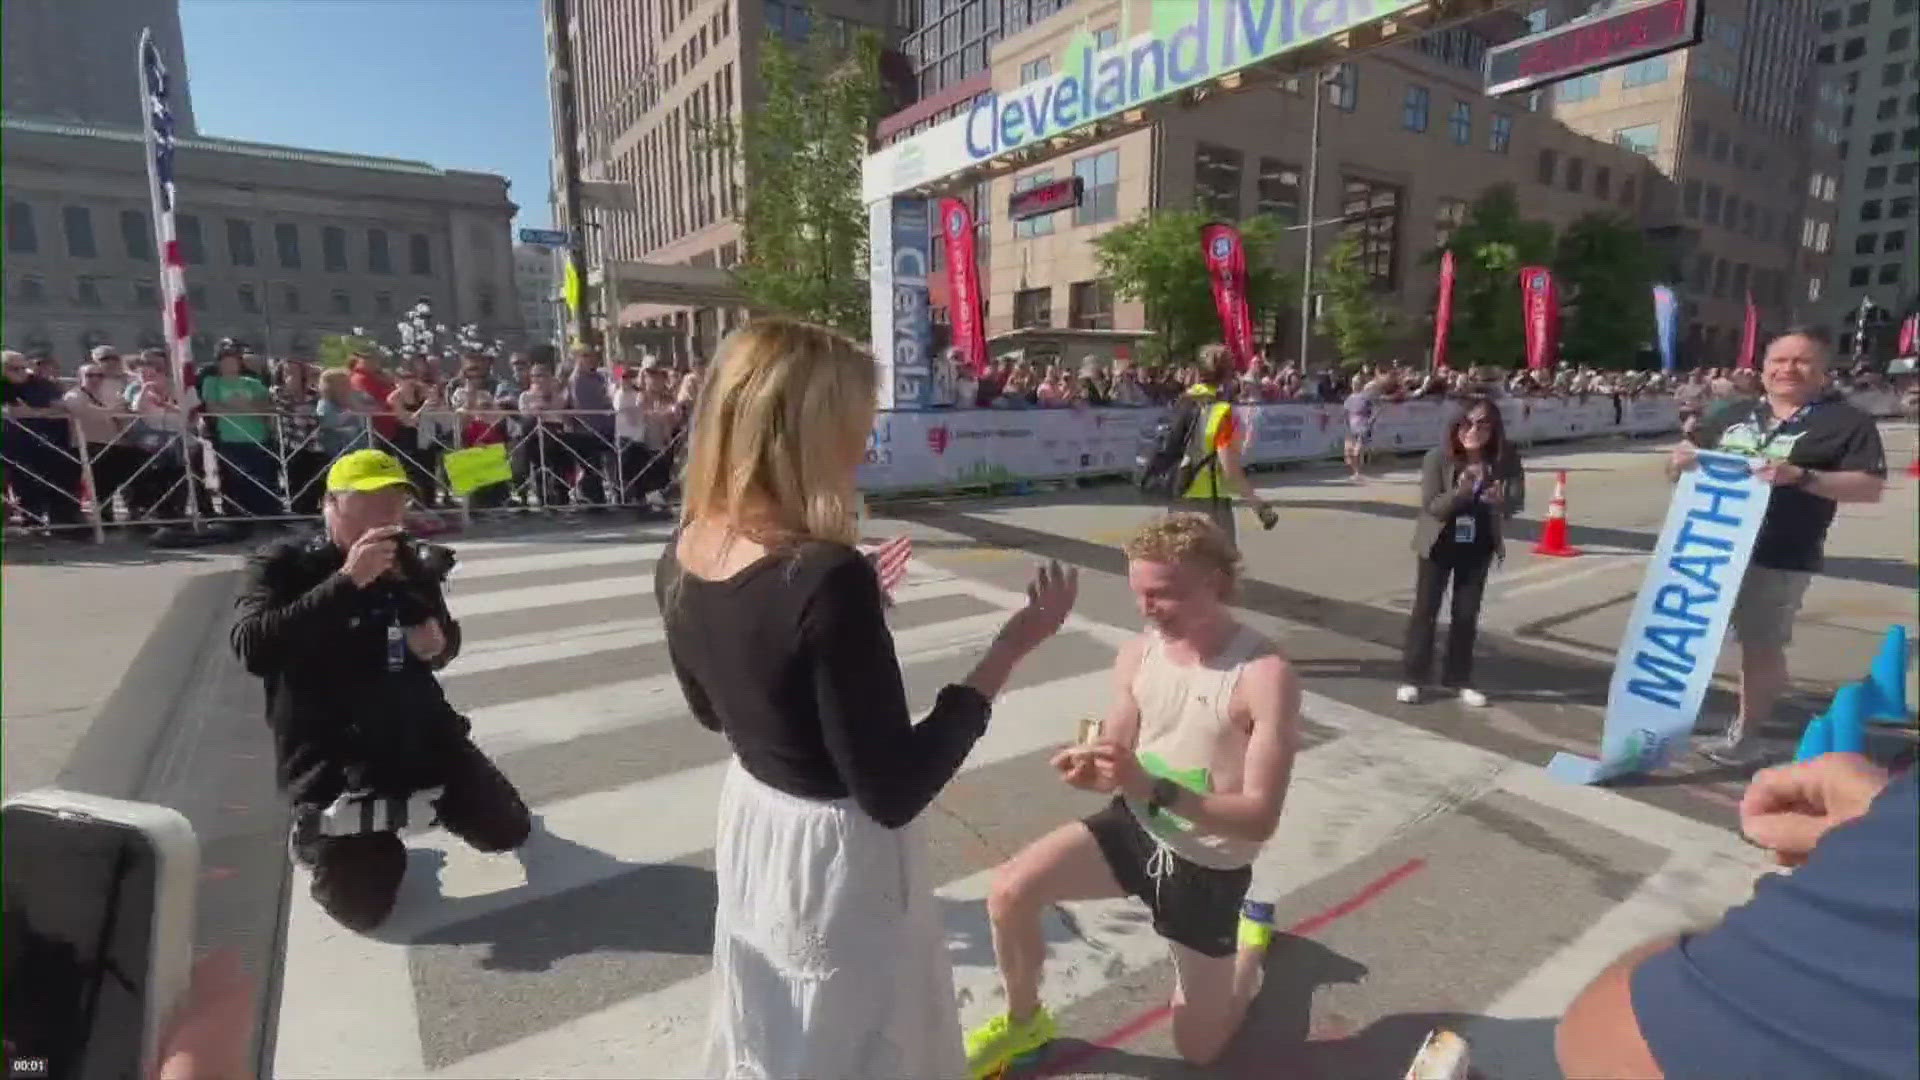 Will Loevner, the 2023 Cleveland Marathon champion, defended his title and won the race again on Sunday. Then he earned another title: fiancé.